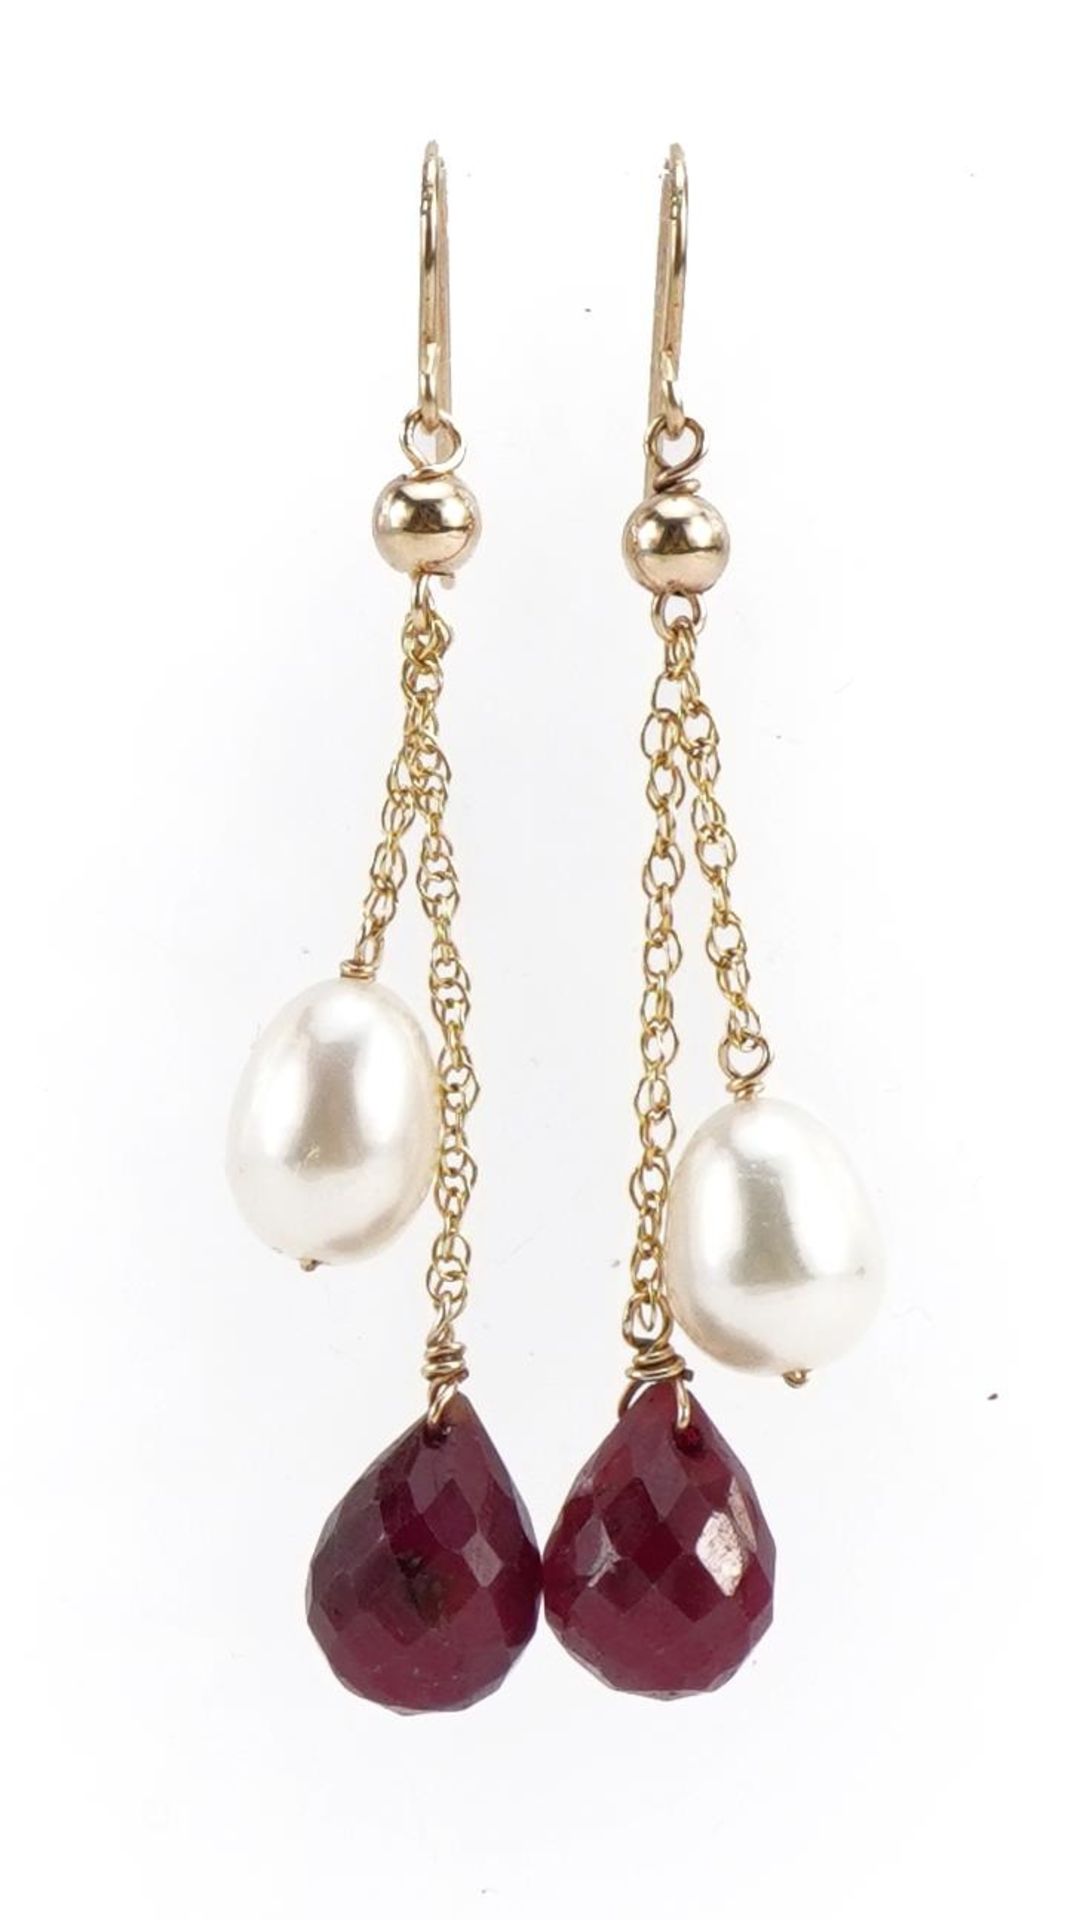 Pair of 14k gold facetted ruby and pearl drop earrings, 4.4cm high, 2.6g